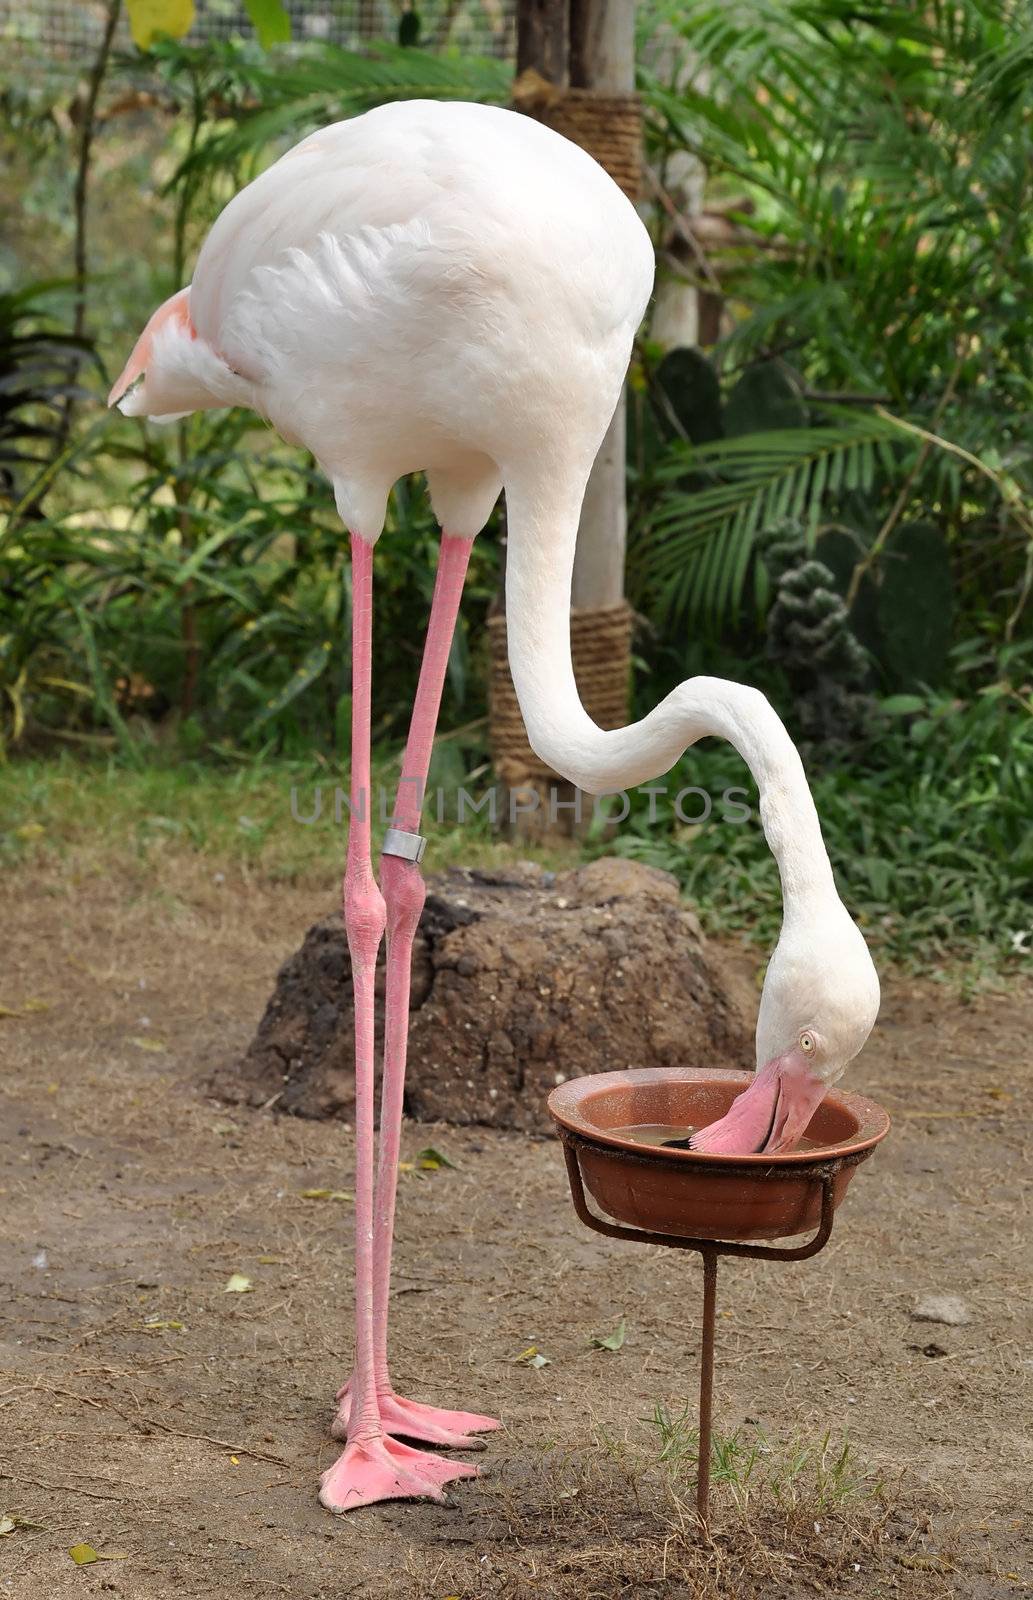 Flamingo often stand on one leg, the other tucked beneath the body.
